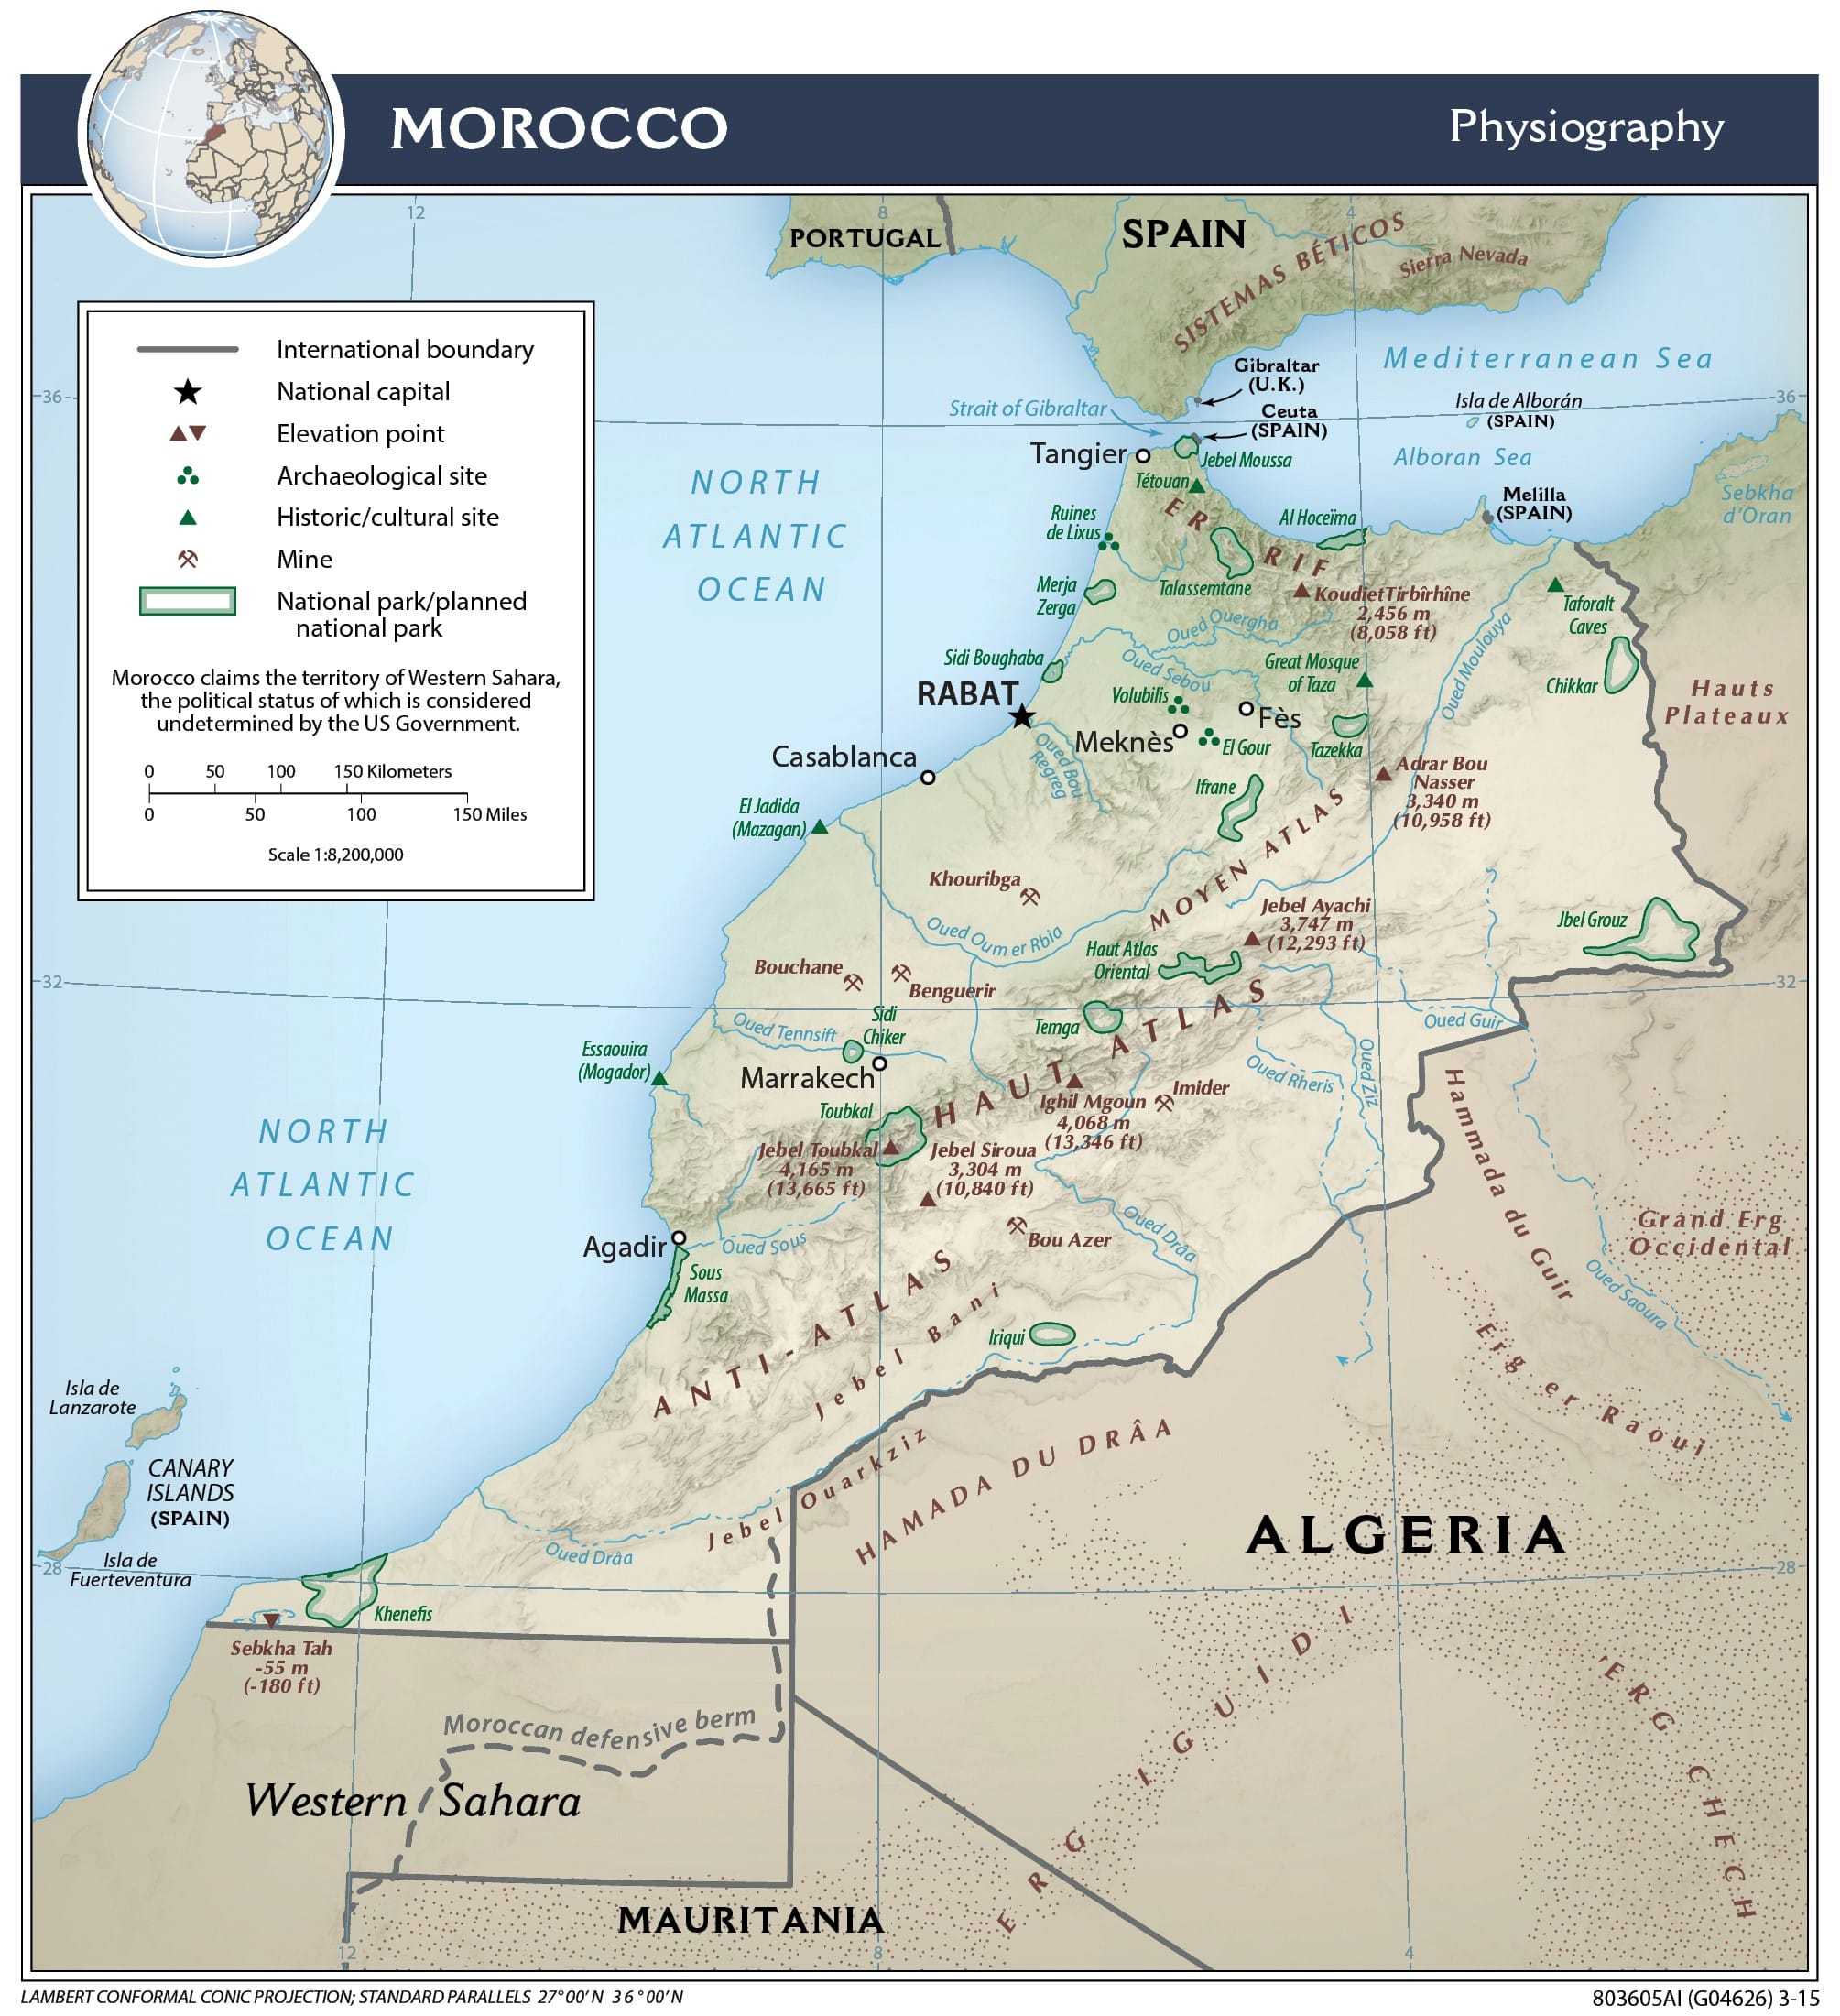 Physiographical map of Morocco.